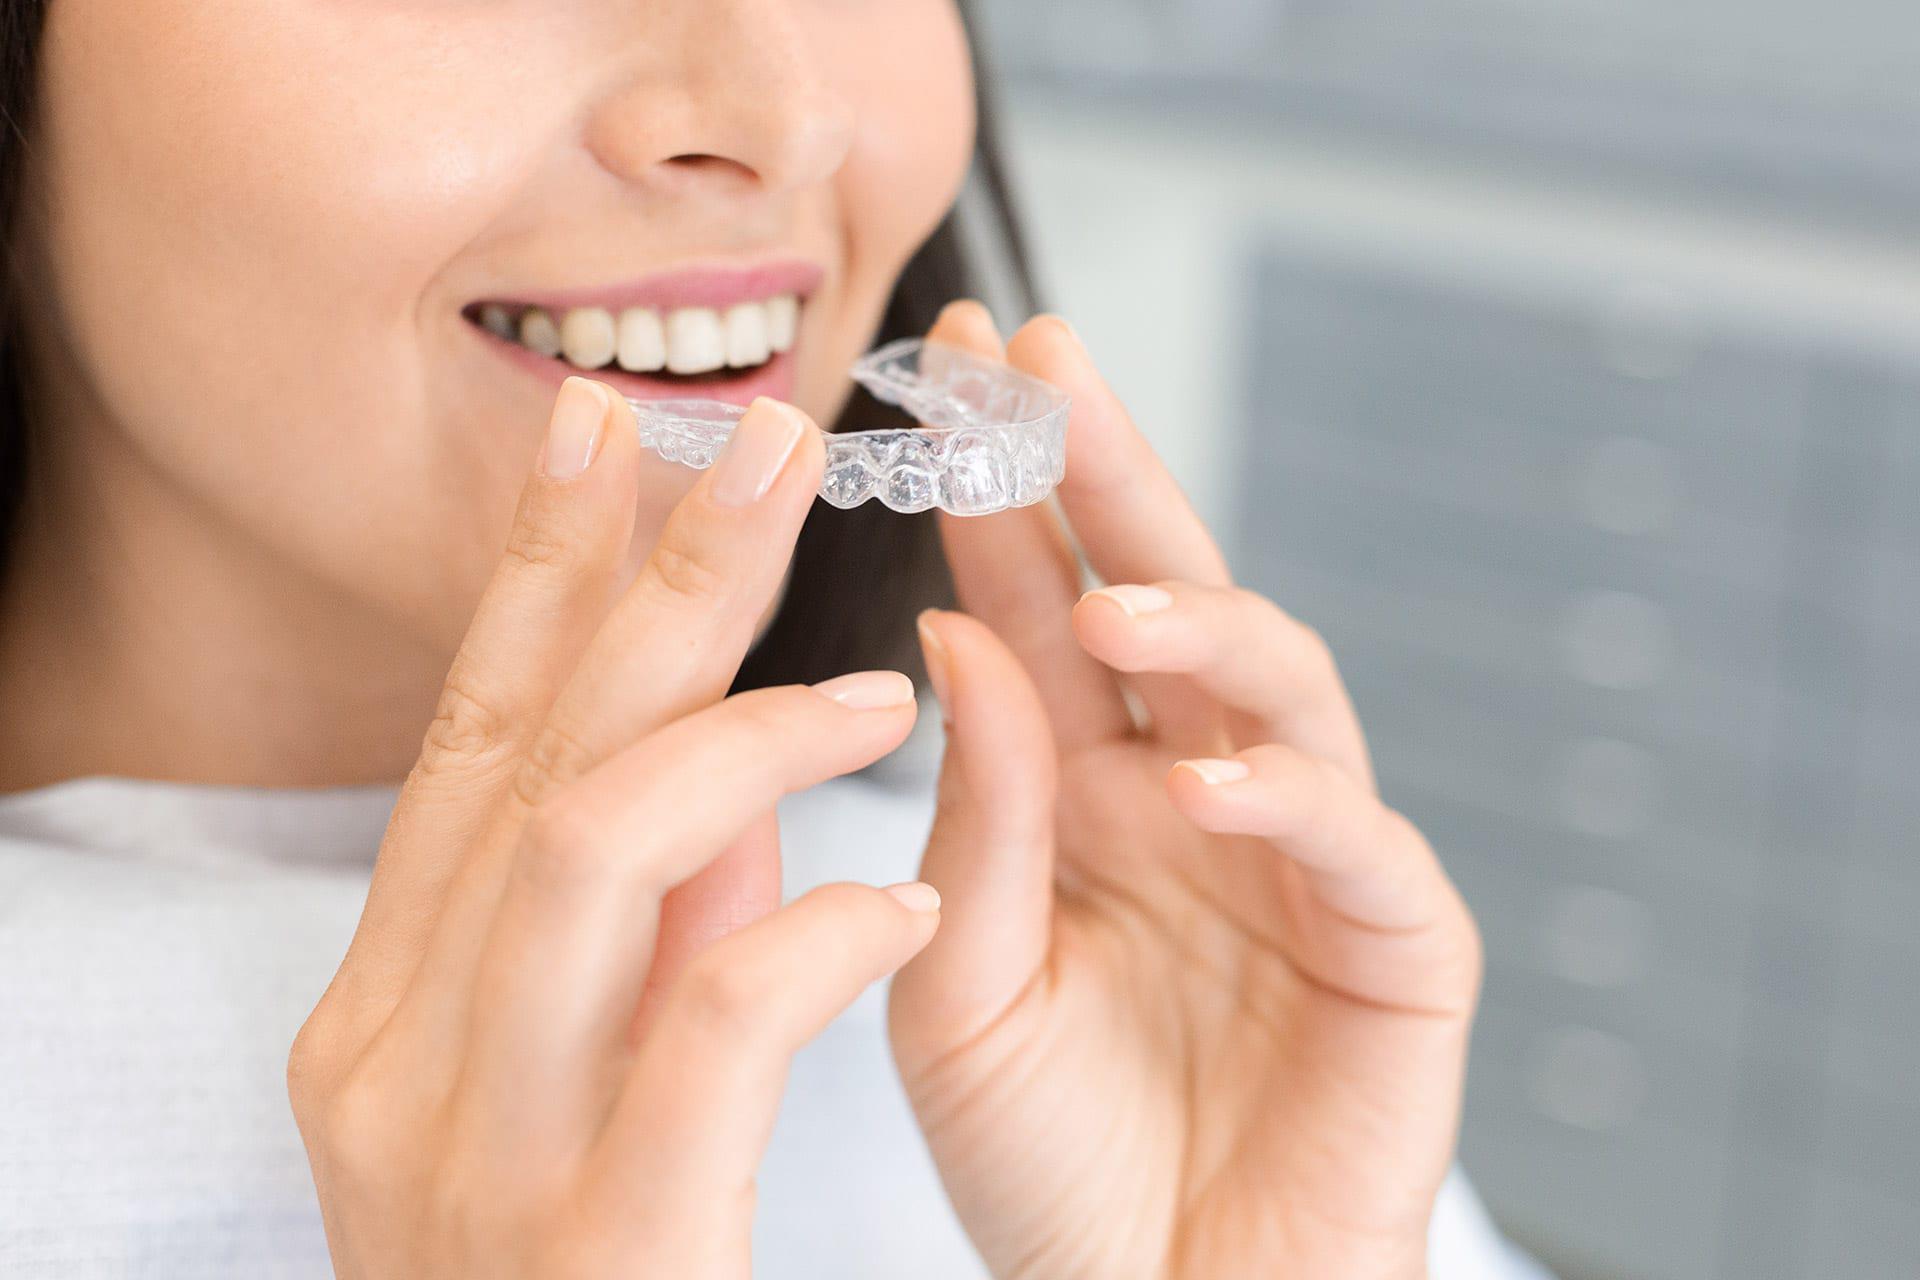 Woman in inserts an Invisalign clear orthodontic aligner from best dentist El Dorado Hills CA